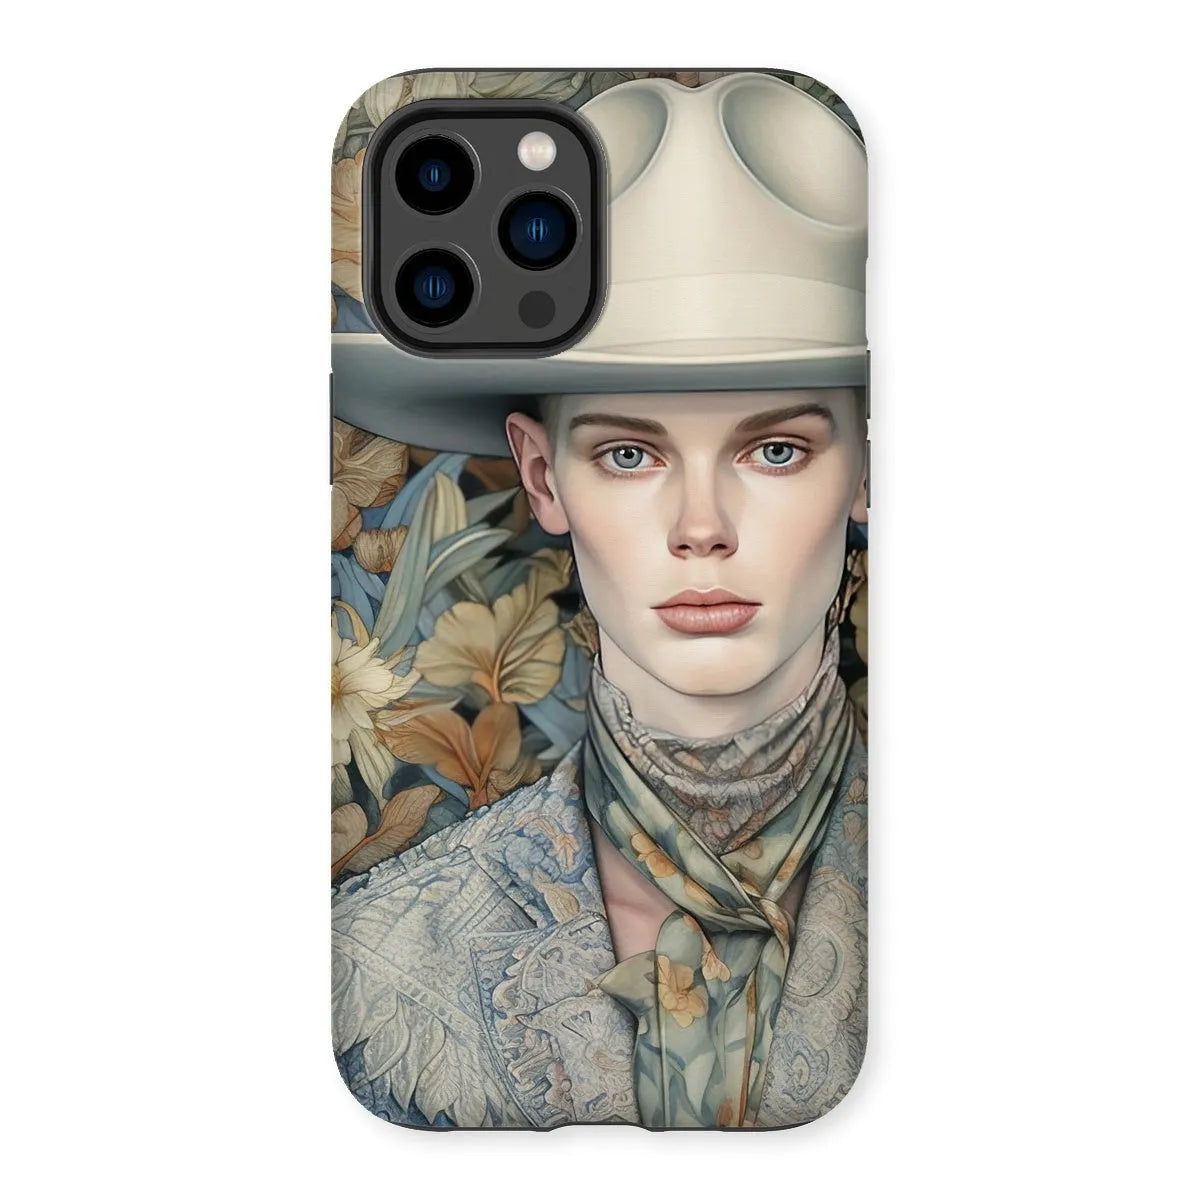 Jasper The Gay Cowboy - Dandy Gay Aesthetic Art Phone Case - Iphone 14 Pro Max / Matte - Mobile Phone Cases - Aesthetic